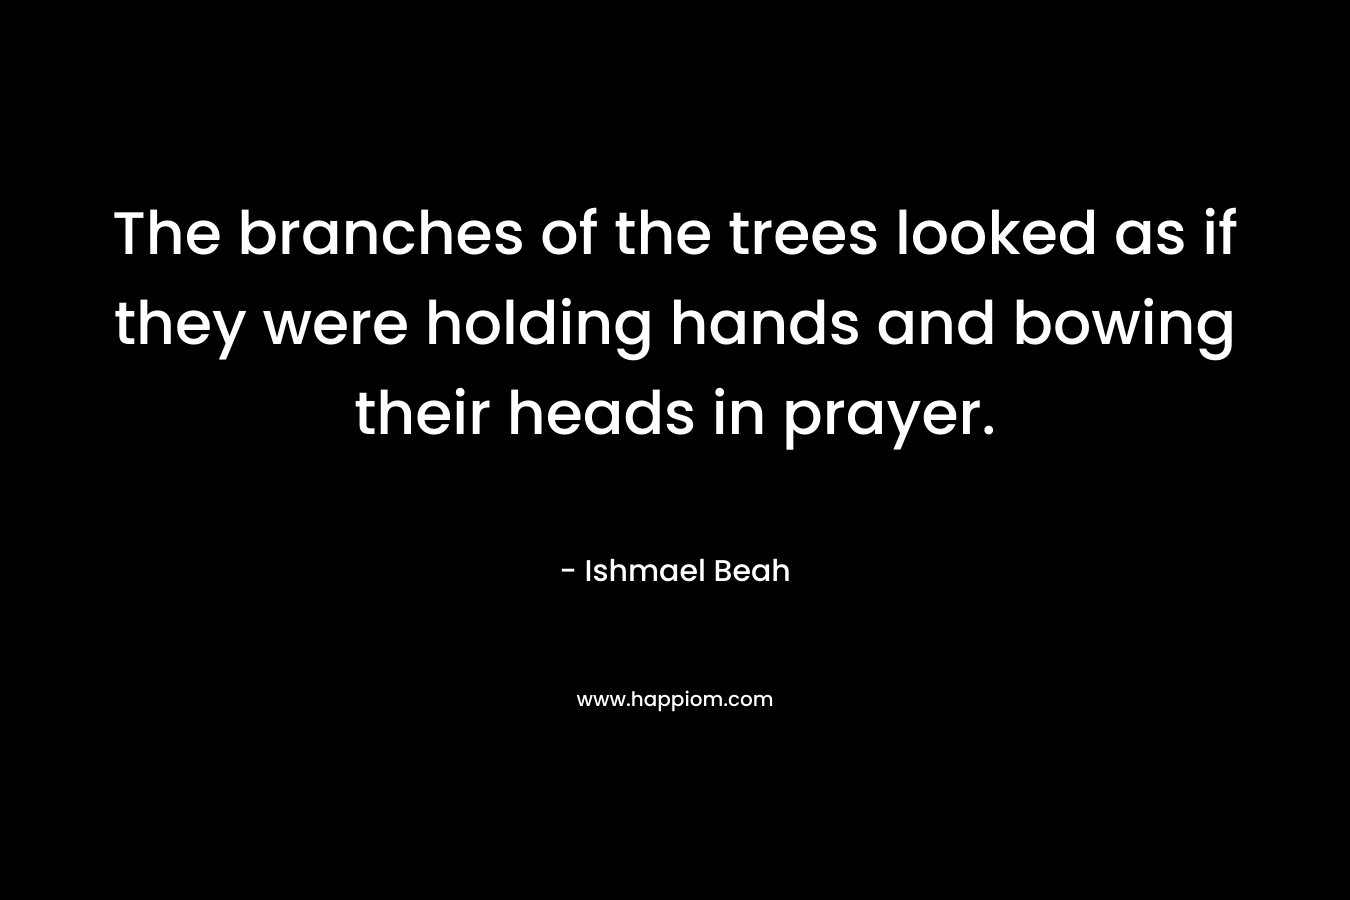 The branches of the trees looked as if they were holding hands and bowing their heads in prayer. – Ishmael Beah